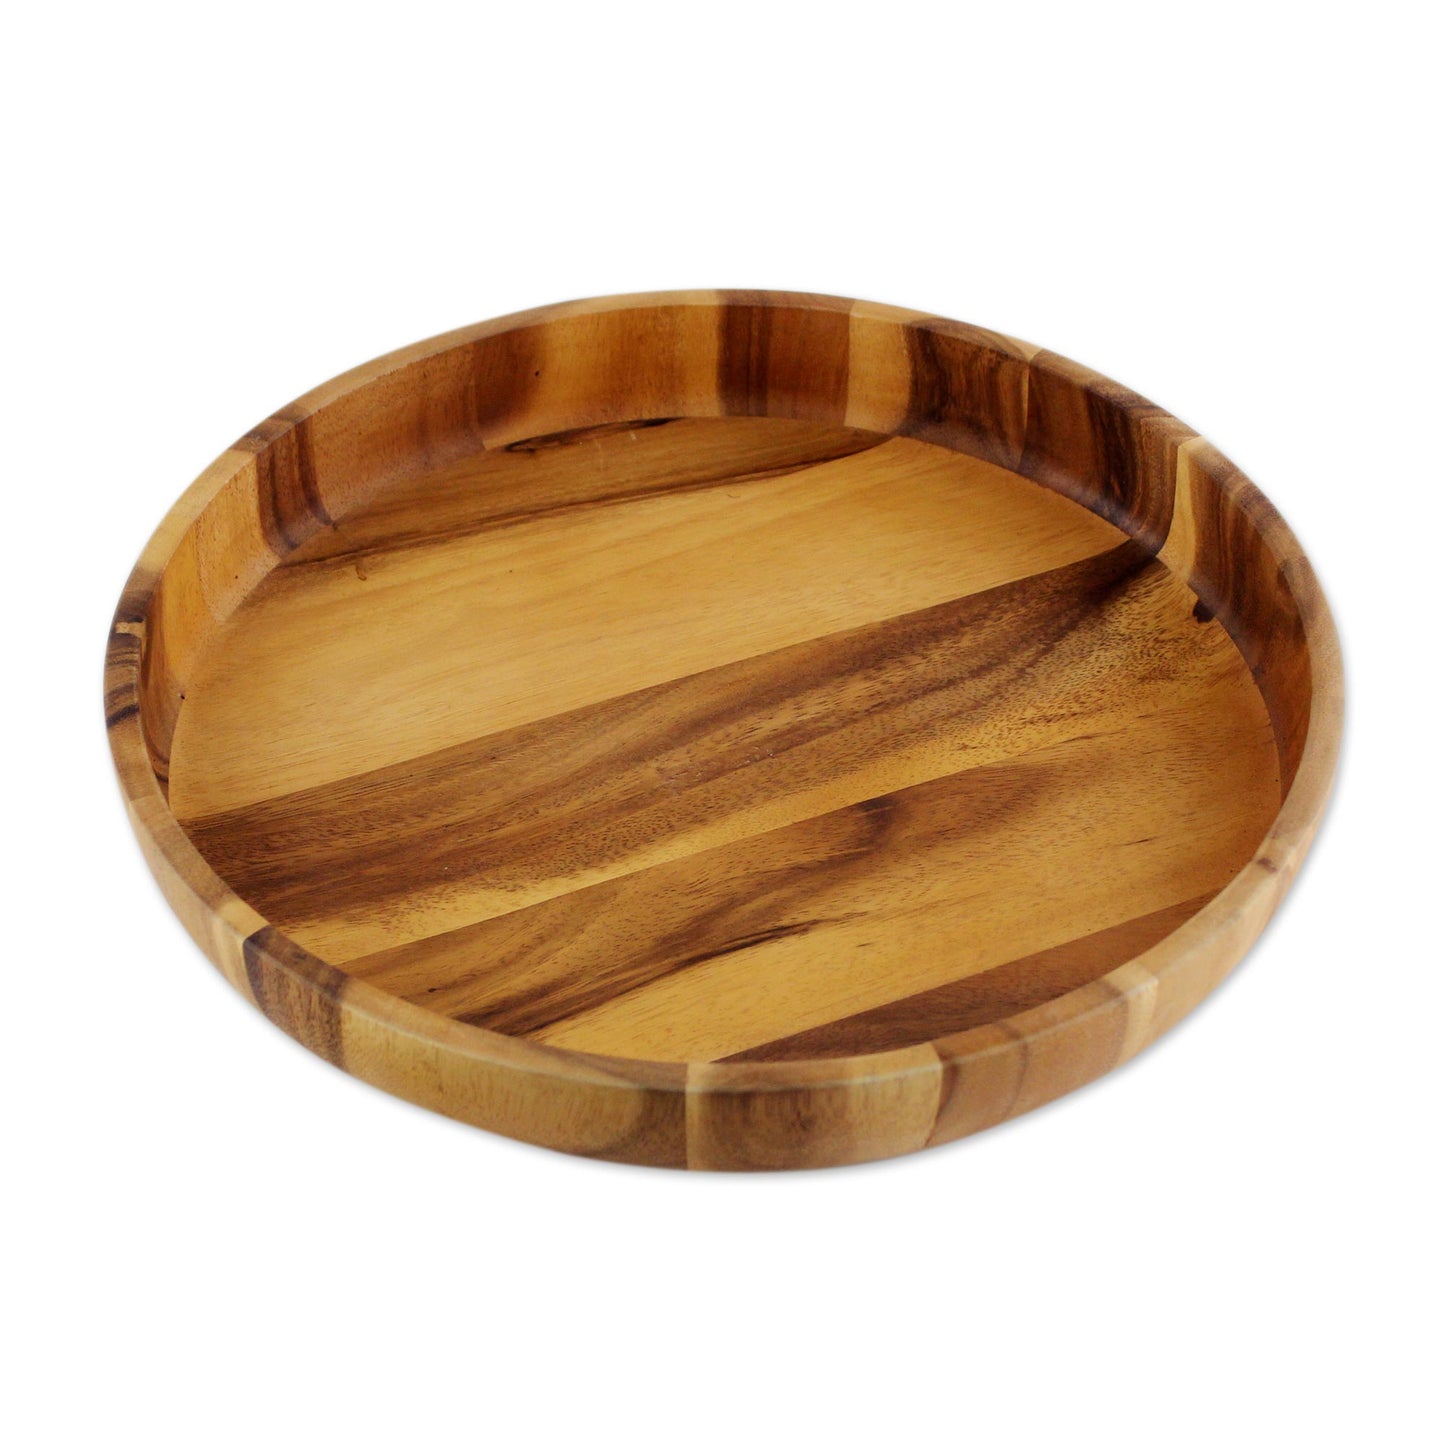 Harmonious Nature Artisan Crafted Natural Wood Serving Bowl from Thailand